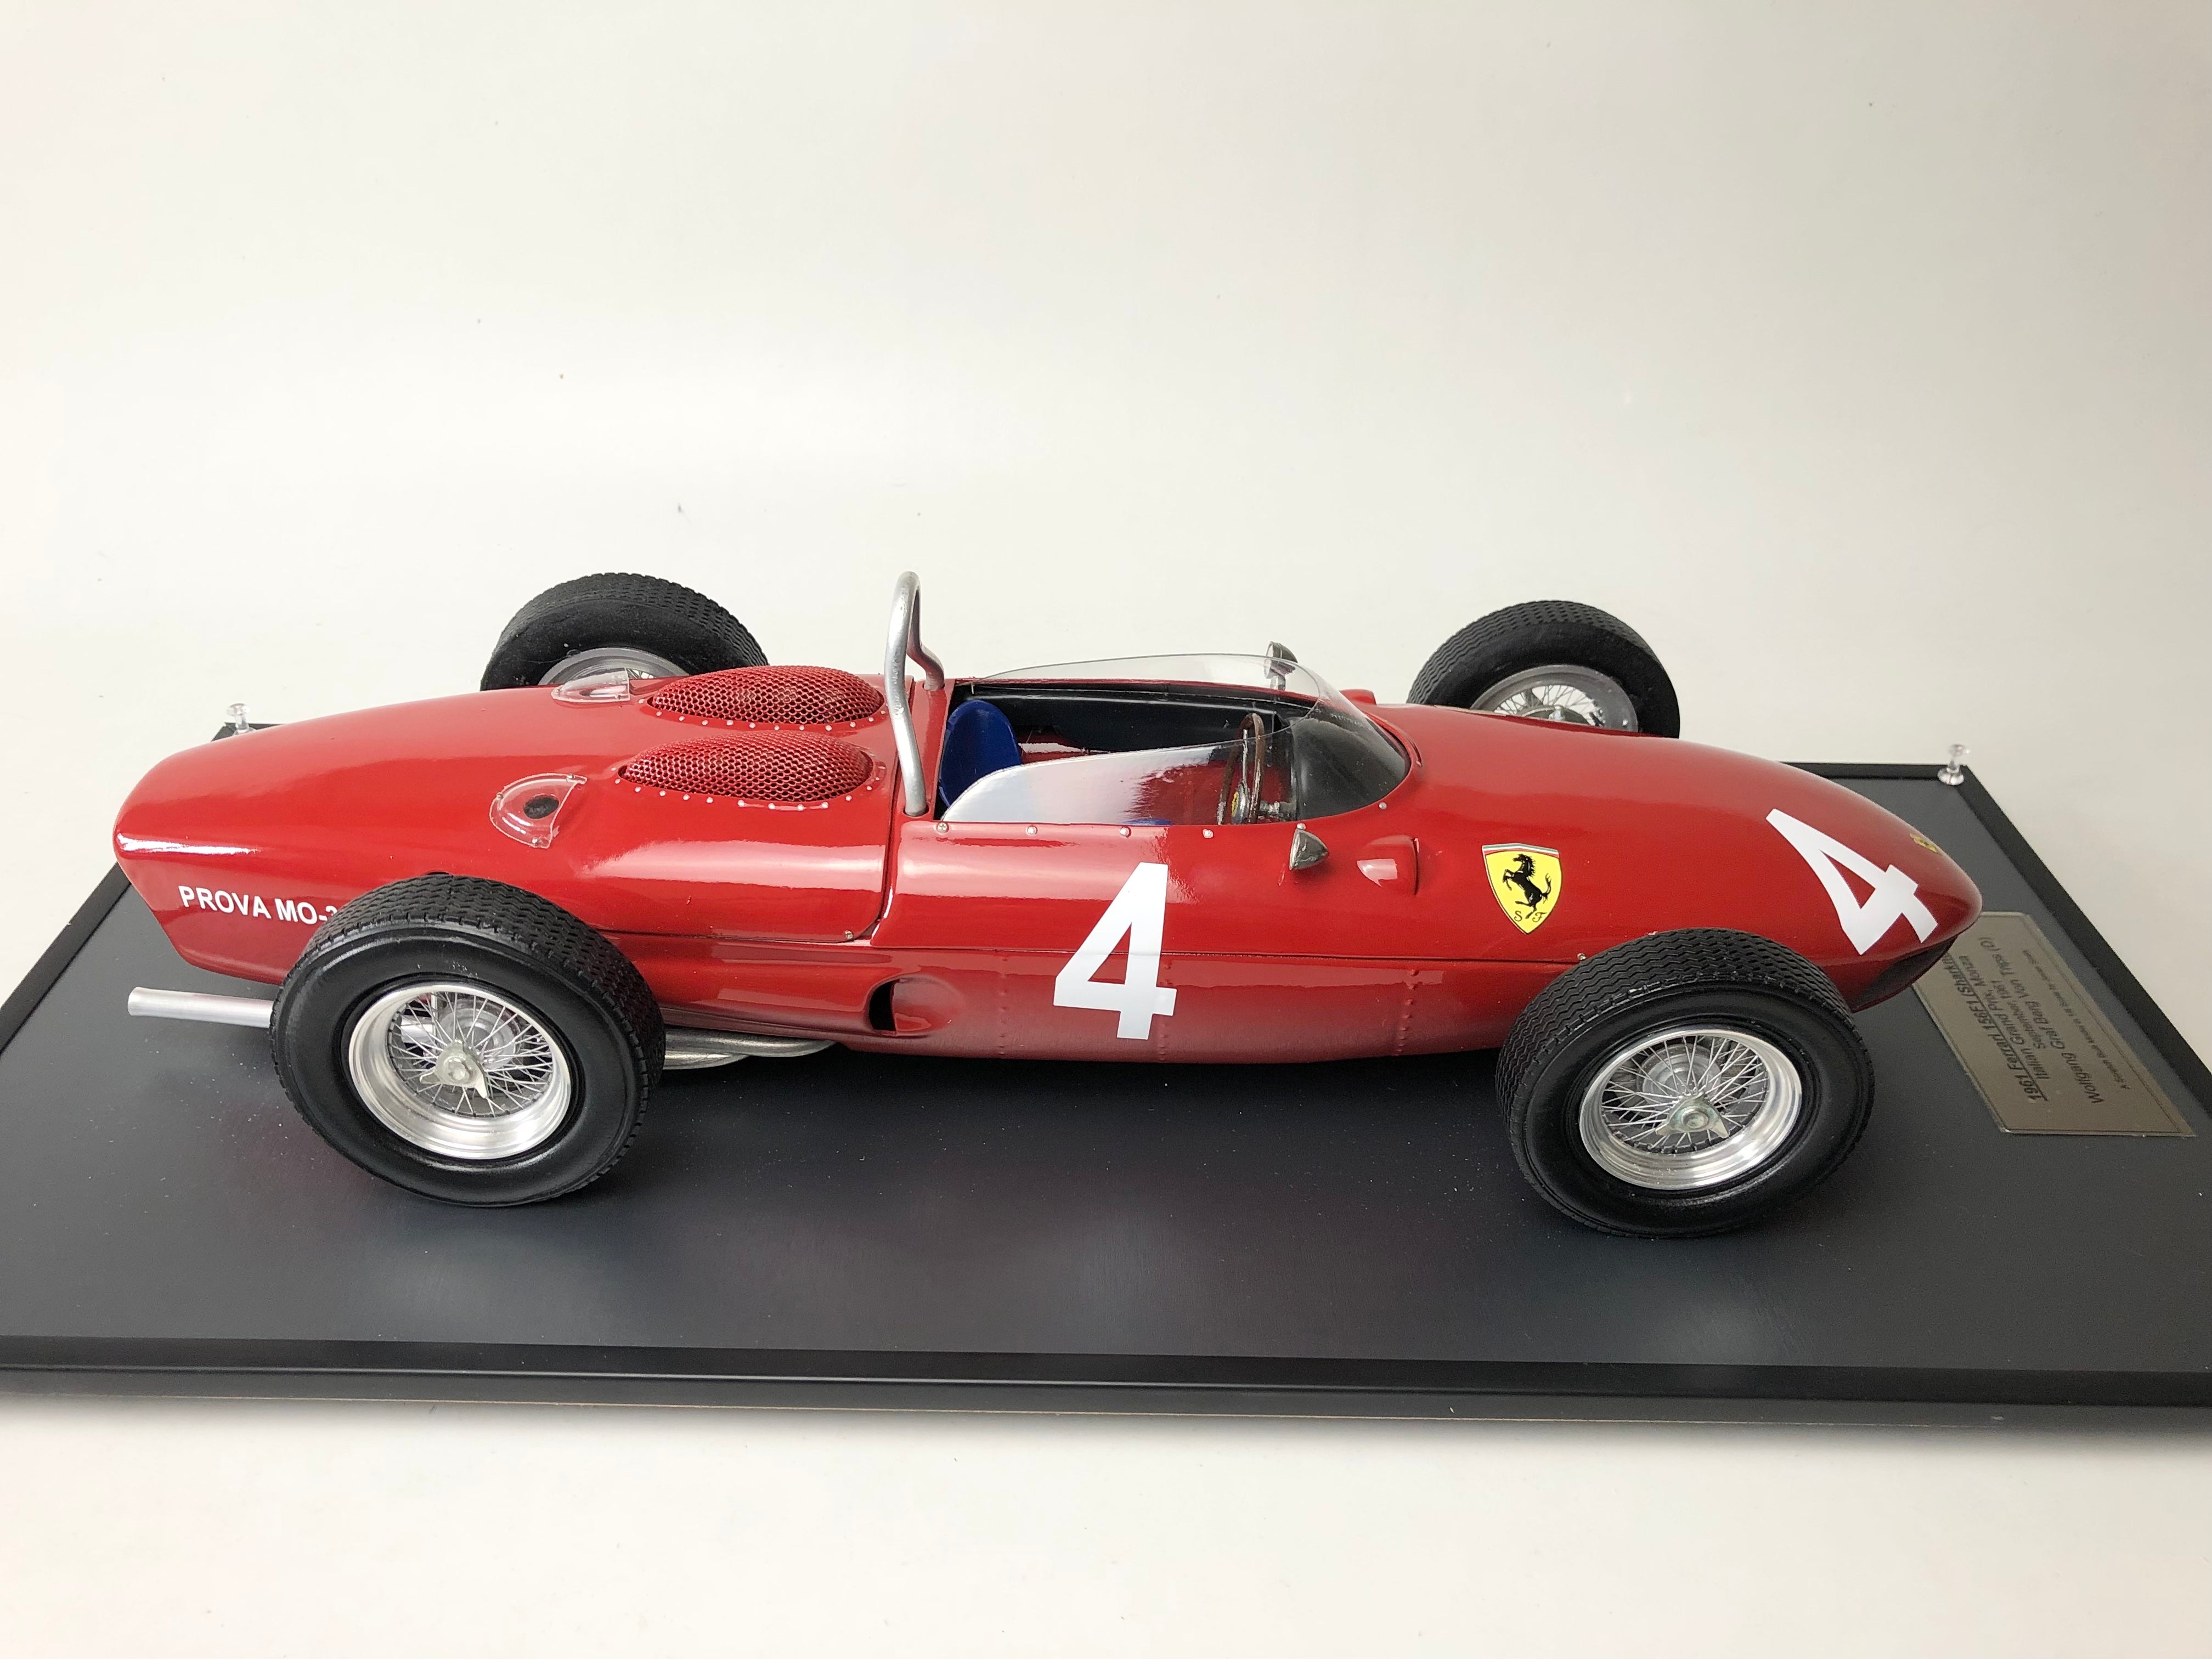 Ferrari 156 'Sharknose' 1:8 scale by Javan Smith